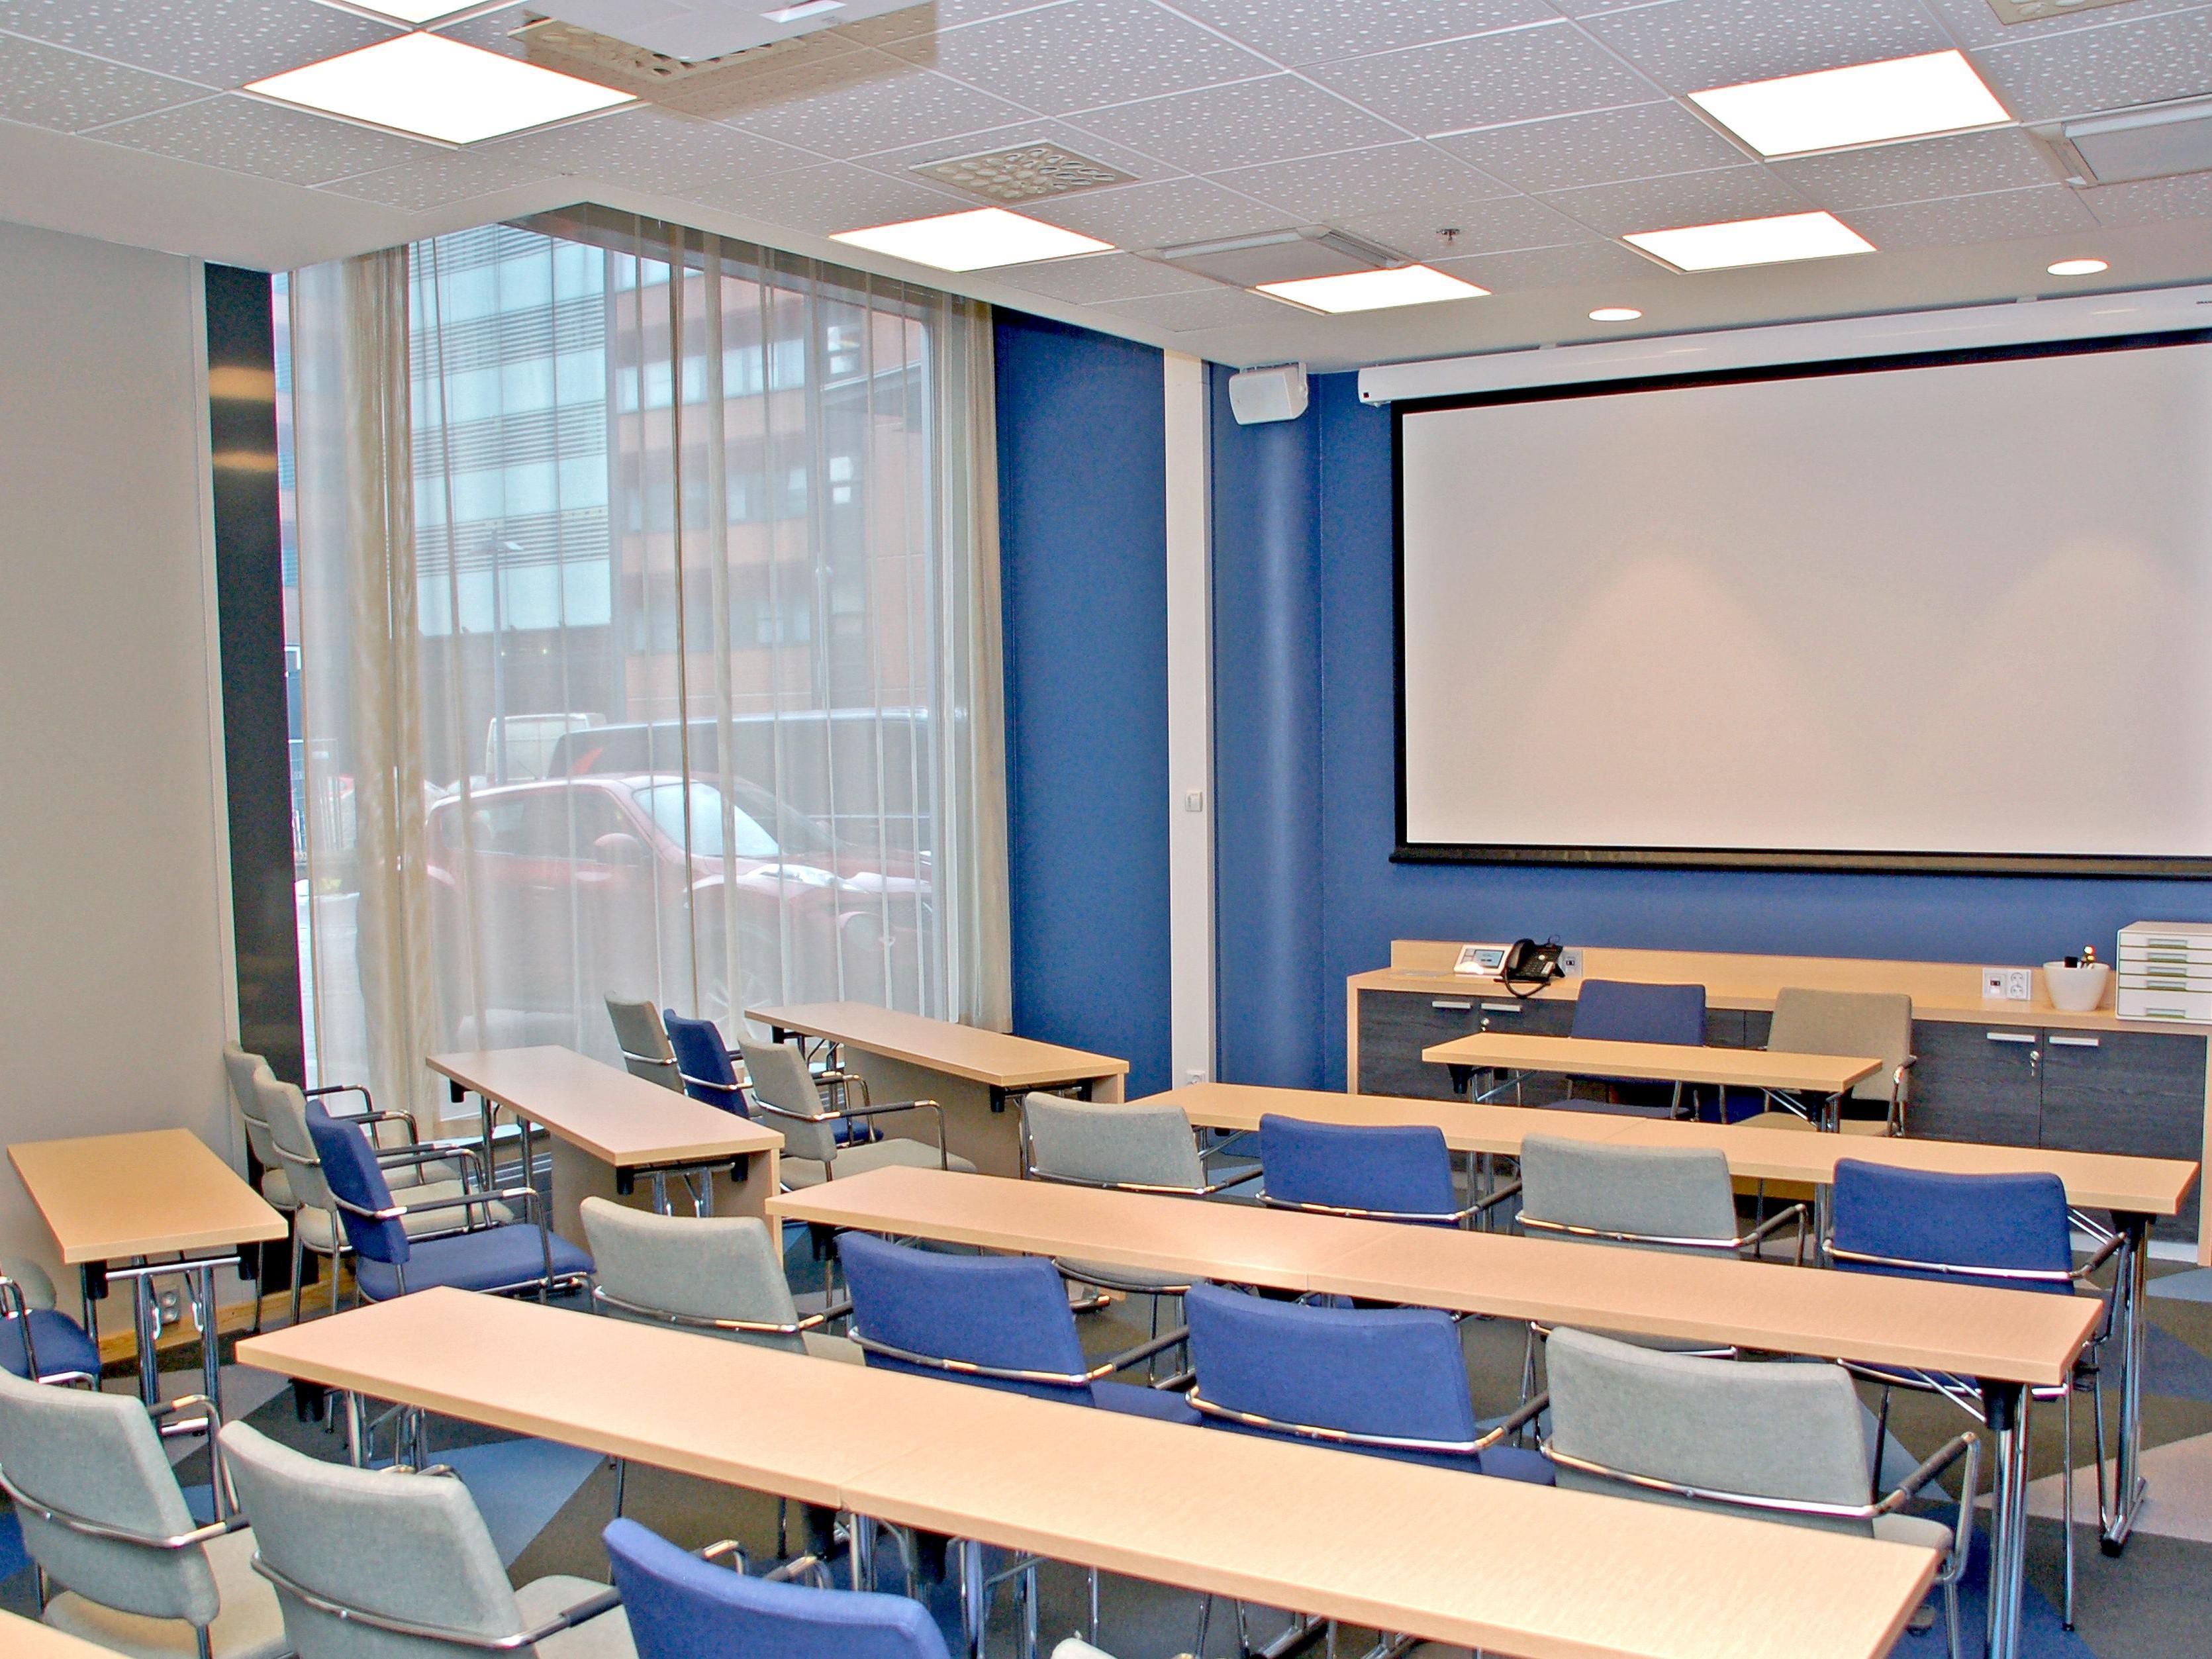 Did you know that you can hold an effective meeting in our multifunctional meeting room, which can serve up to 24 guests? Contact our sales at holidayinnhelsinki.fi for more information or take a tour at our 360 show. You can also hold a small relaxed get-together party at out Break Out Lounge. 